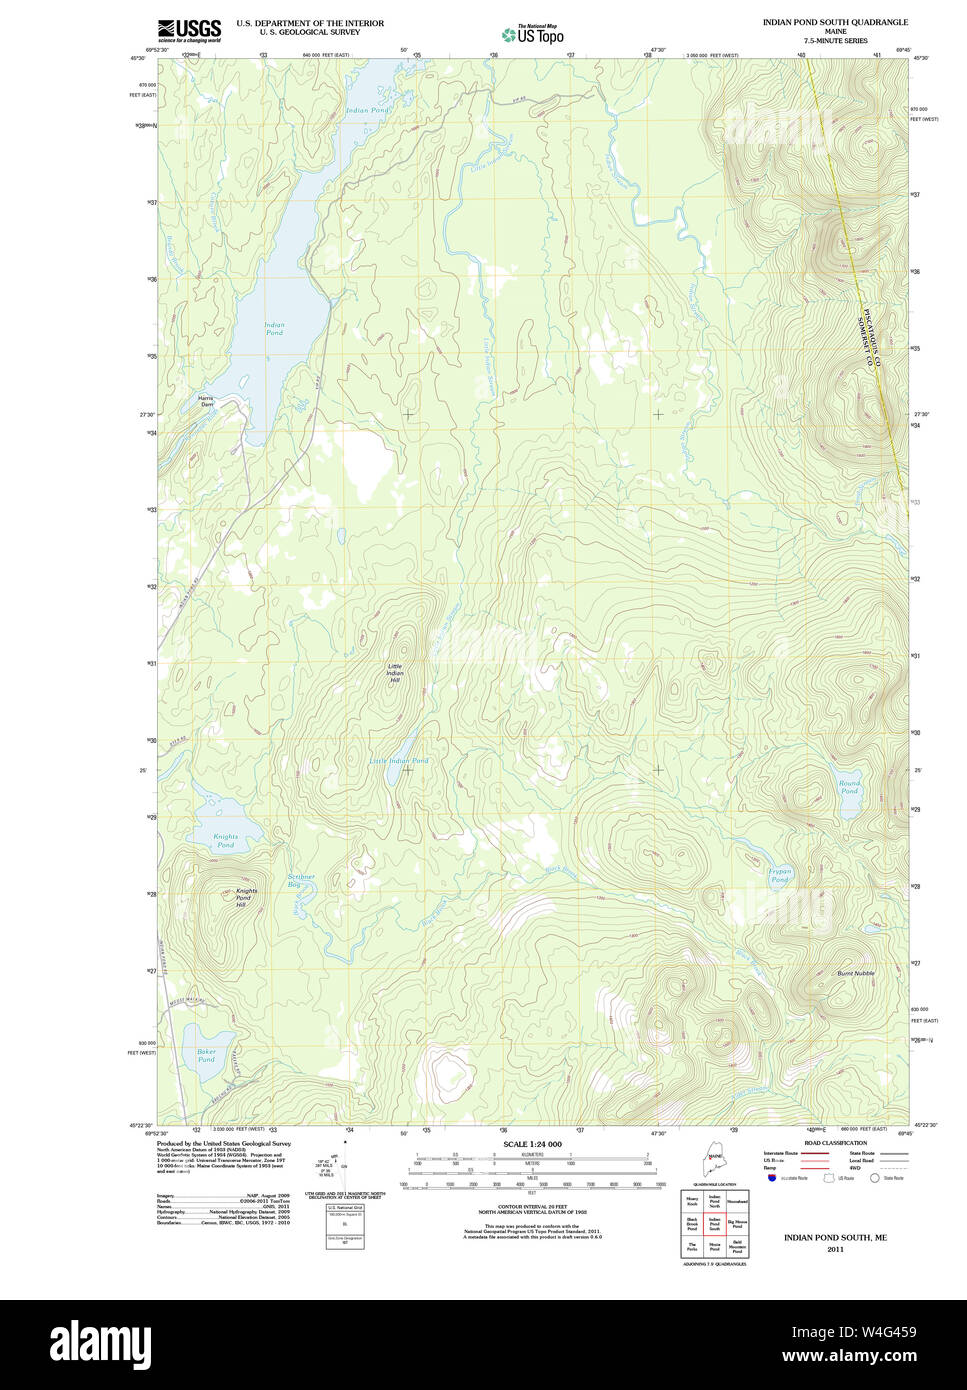 Maine USGS Historical Map Indian Pond South 20110902 TM Restoration Stock Photo